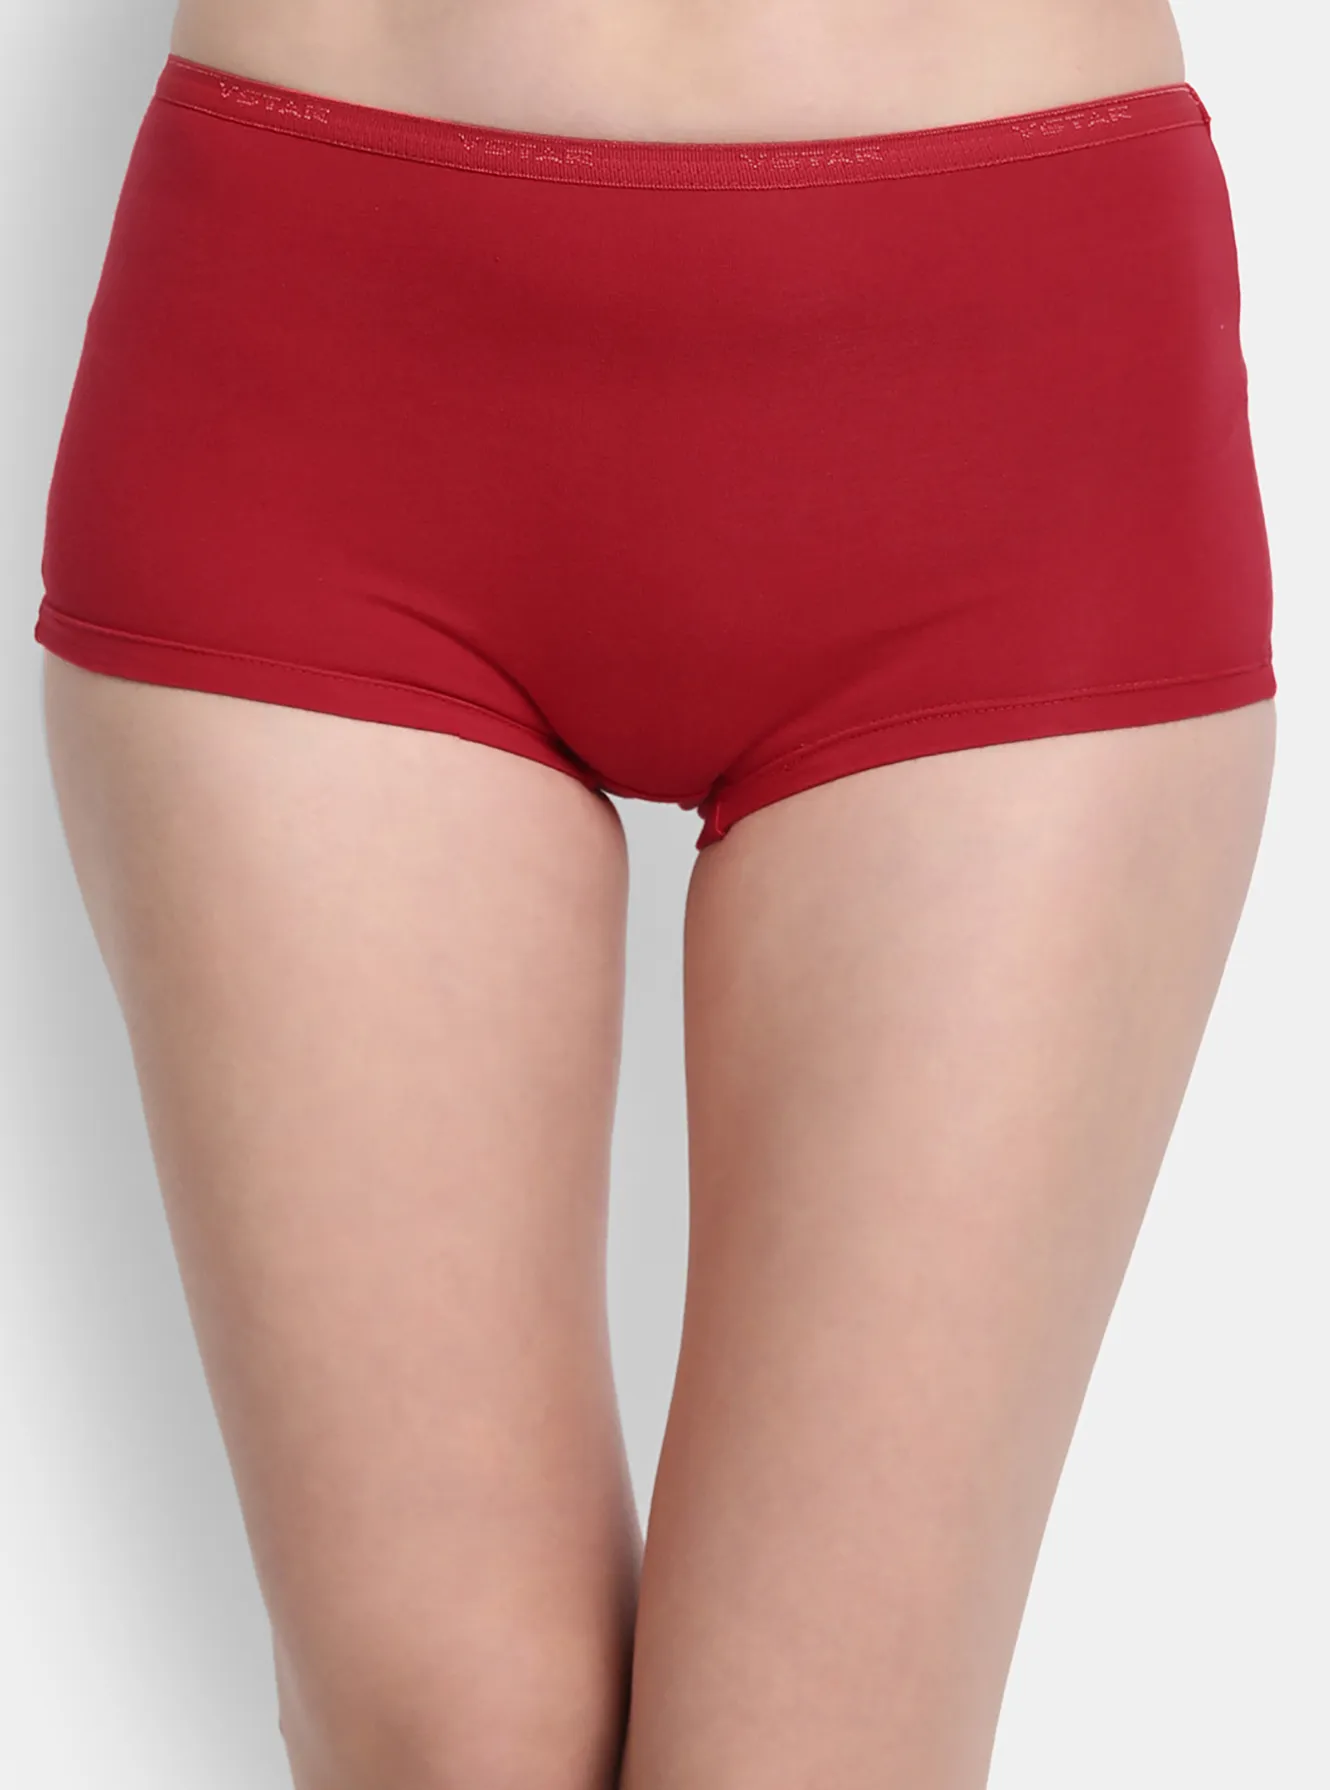 Mid rise boy short panty with extra leg coverage - Pack of 2, Buy Mens &  Kids Innerwear